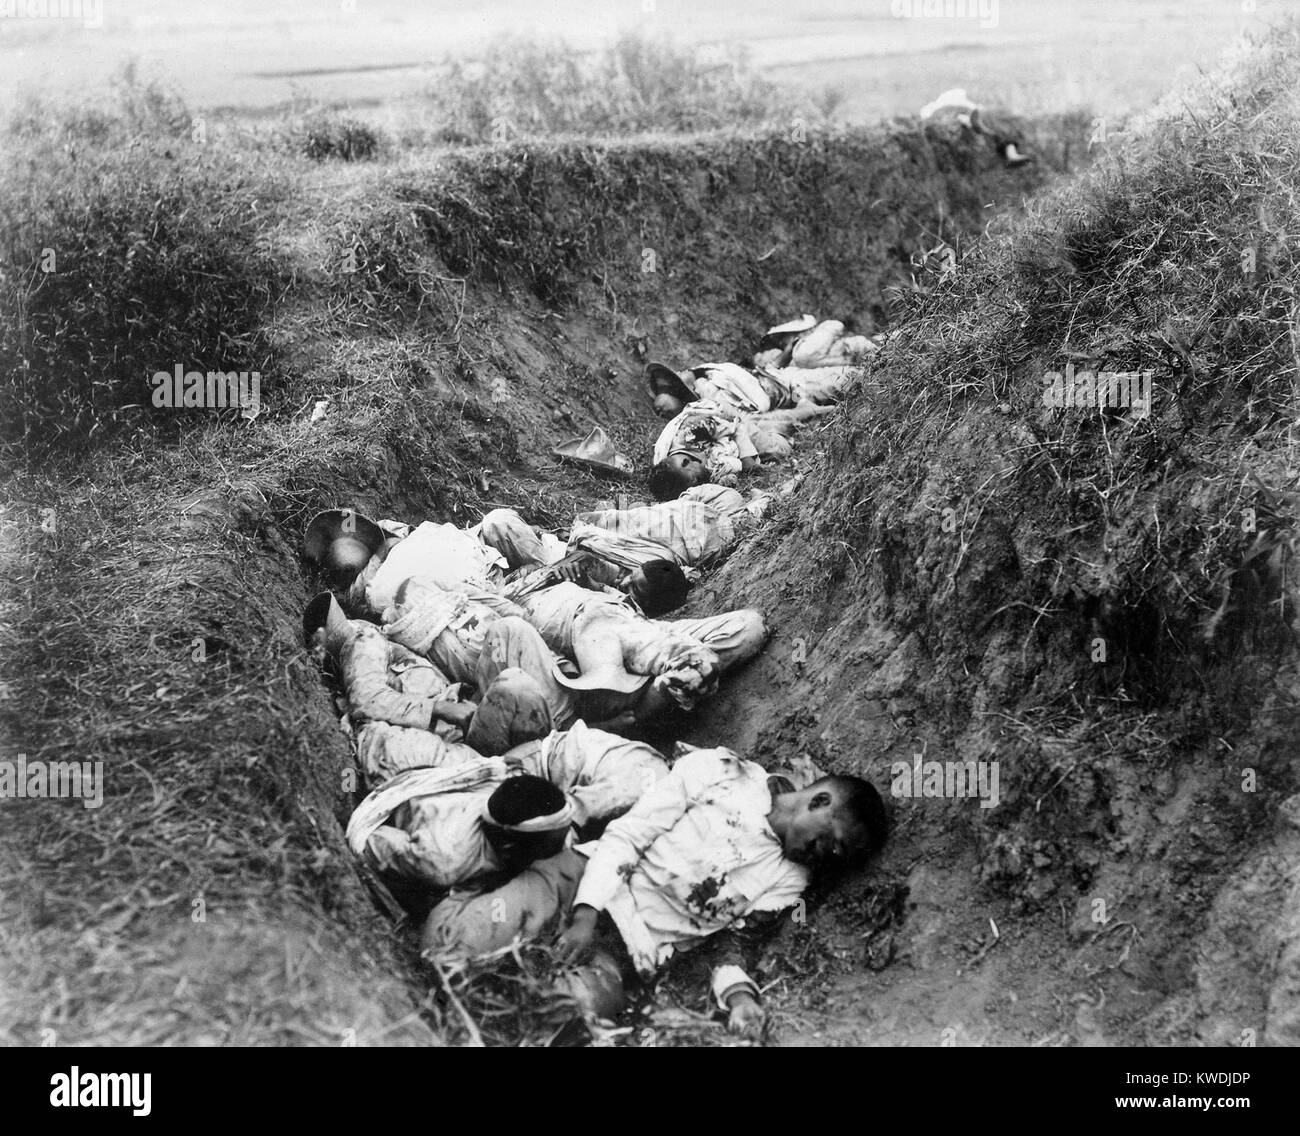 Filipino casualties on the first day of Philippine-American War, Feb. 5, 1899. Insurgent dead fell in the trench near Santa Ana, Feb. 5, 1899. Photo shows a small portion of the circular trench. 238 Filipinos were killed in the Battle of Manila, with US deaths at 55 (BSLOC 2017 10 72) Stock Photo